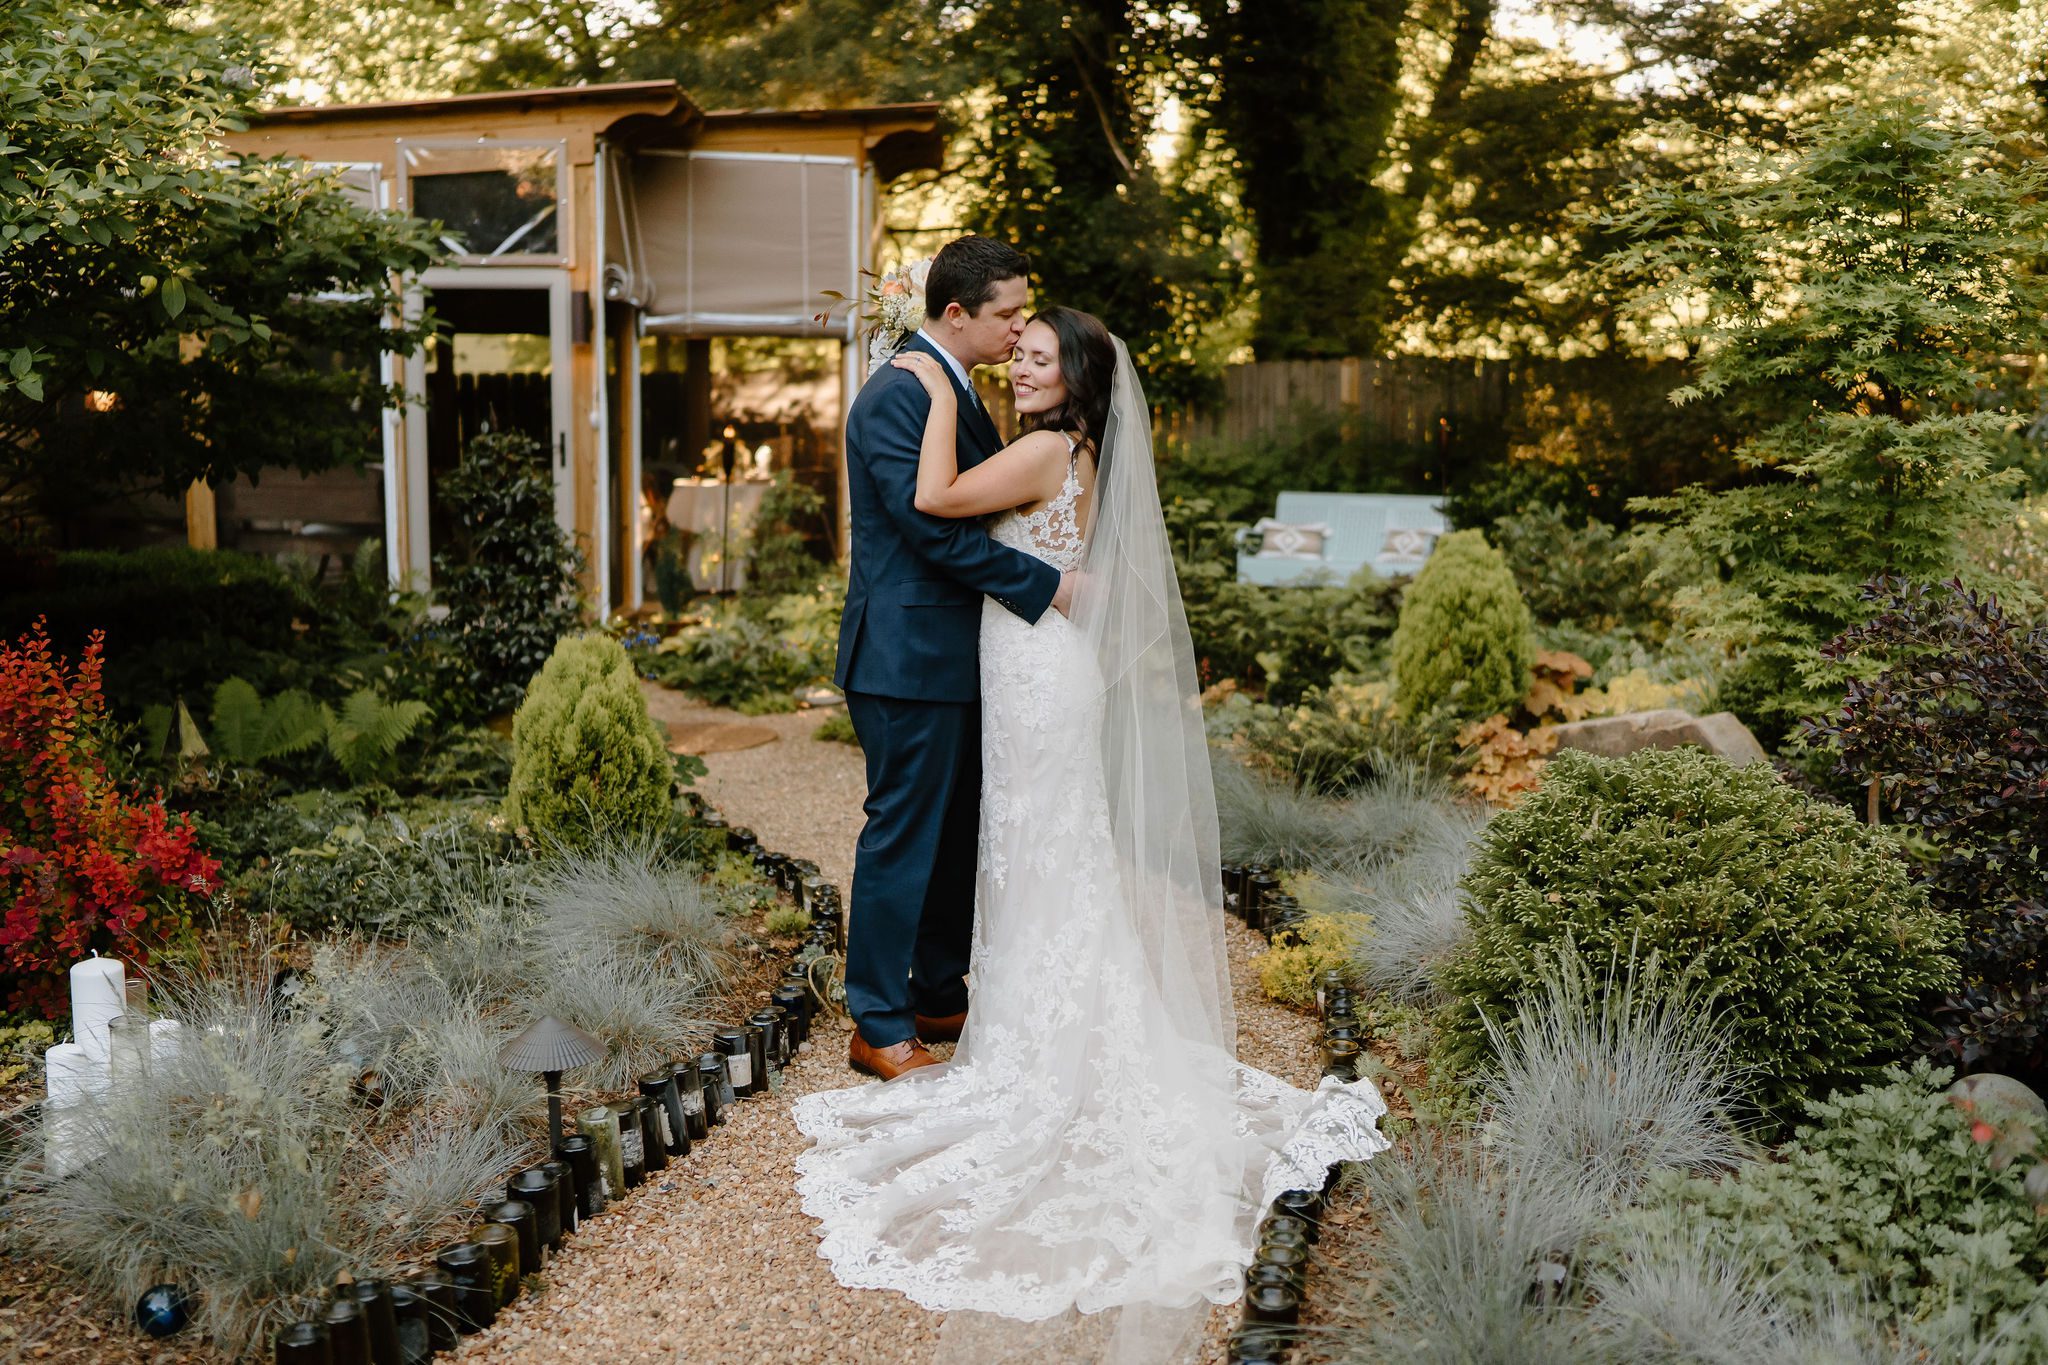 Greensboro bridal photos with gorgeous bride and groom in an intimate outdoor garden wedding setting